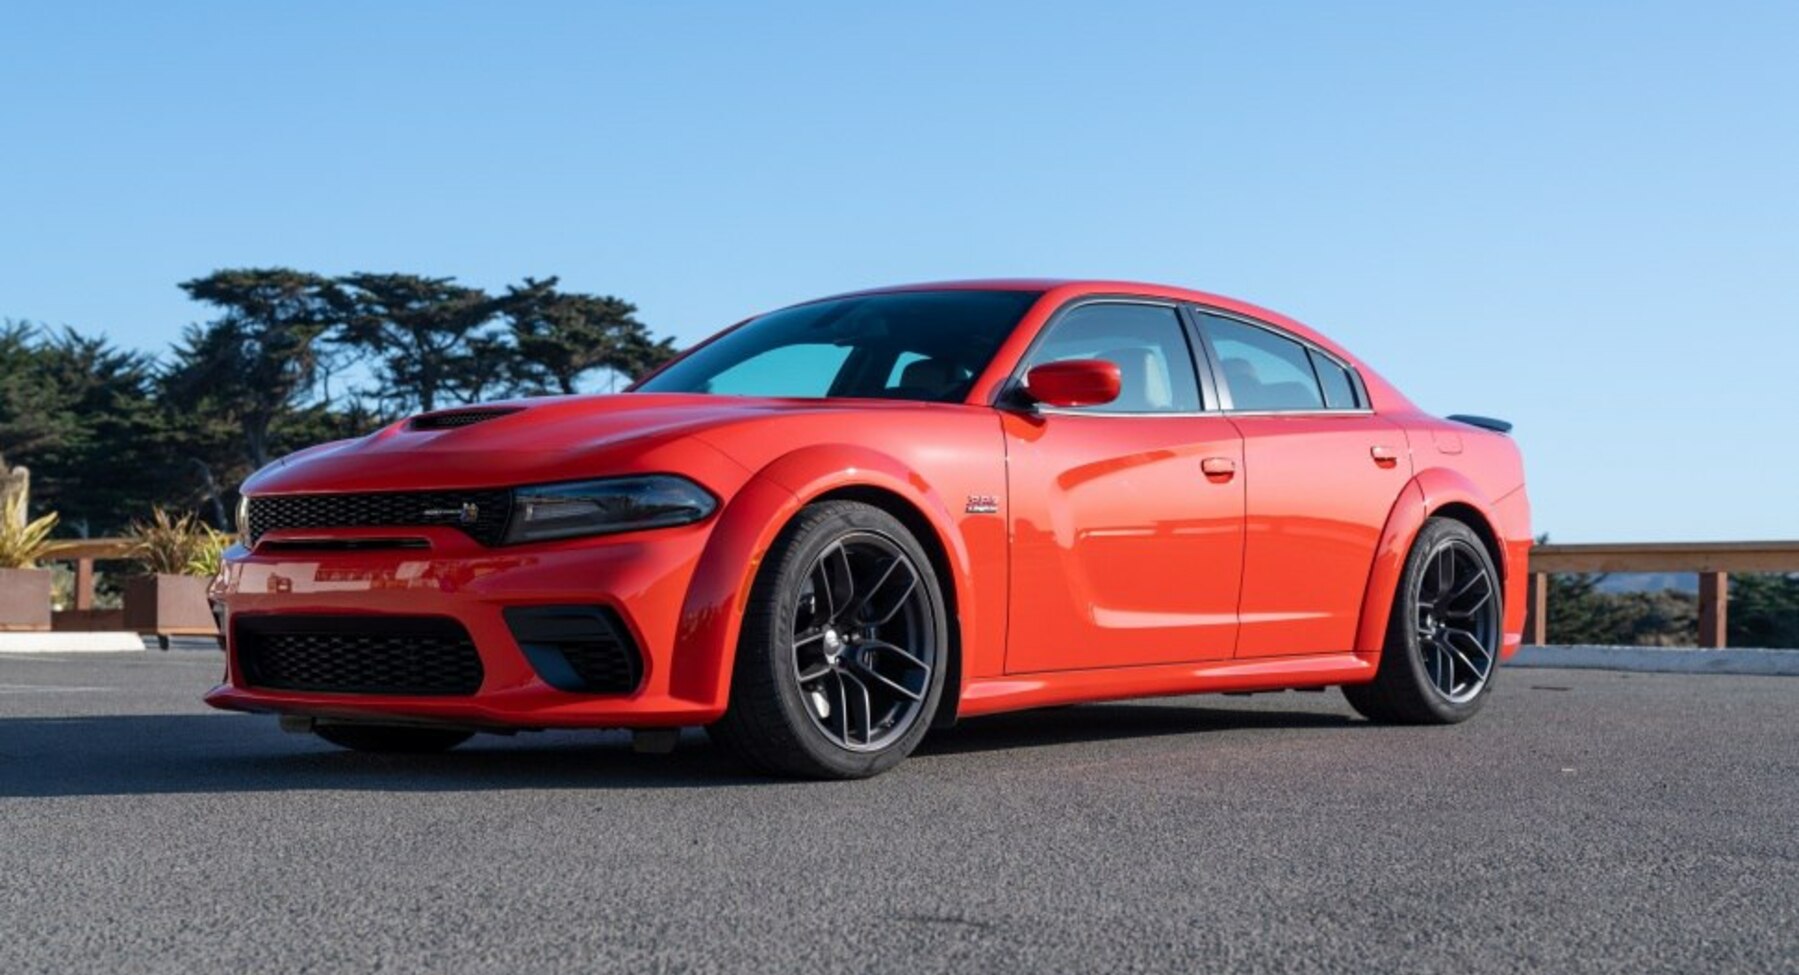 Dodge Charger VII (LD; facelift 2019) SRT Hellcat Redeye 6.2 V8 (797 Hp) Widebody Automatic 2020, 2021, 2022